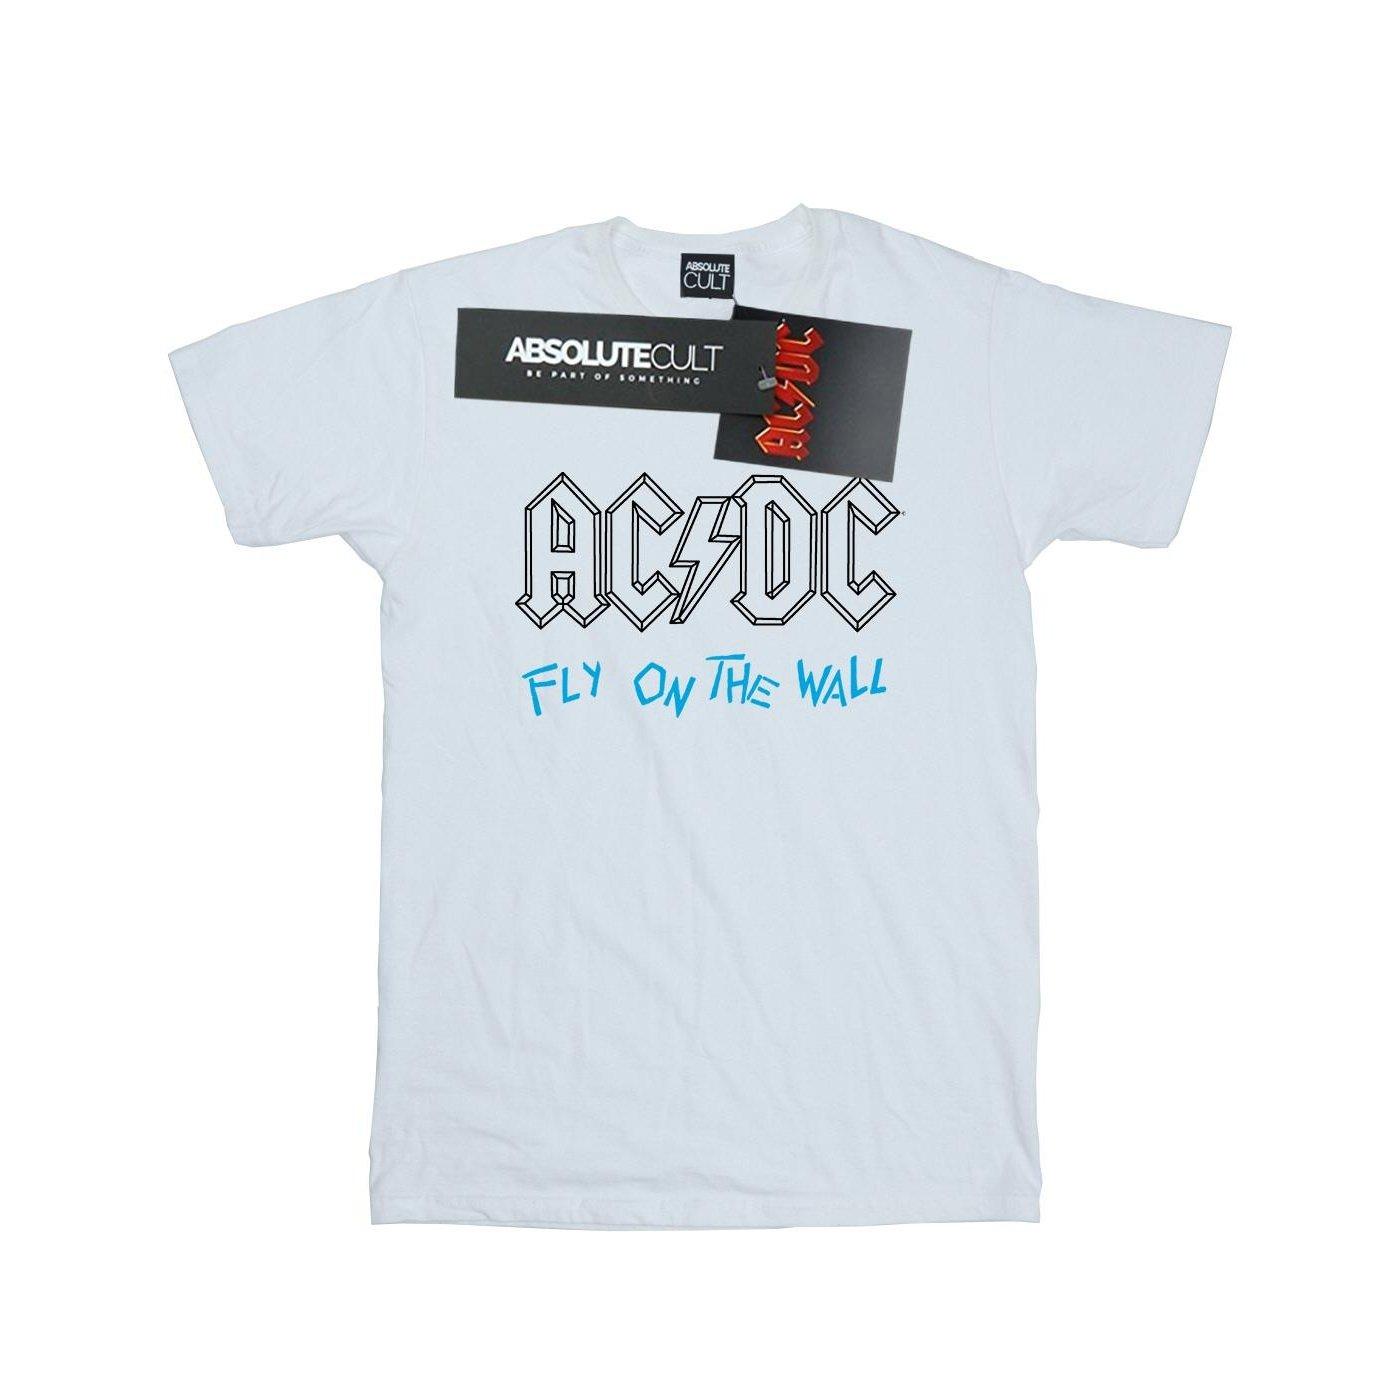 Acdc Fly On The Wall Outline Tshirt Damen Weiss XL von AC/DC